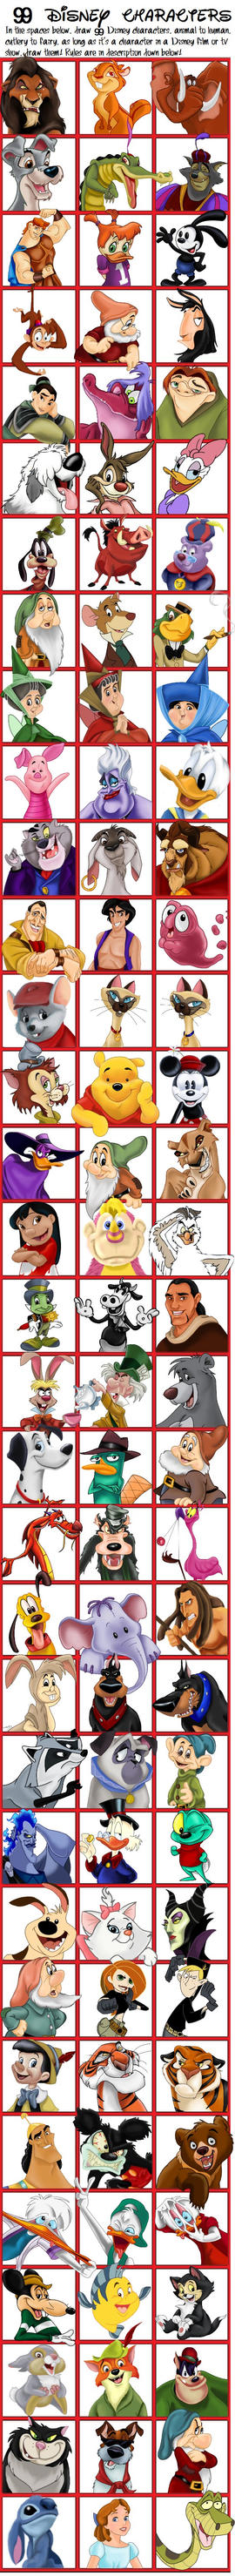 99 Disney Characters Finished by amydrewthat on DeviantArt